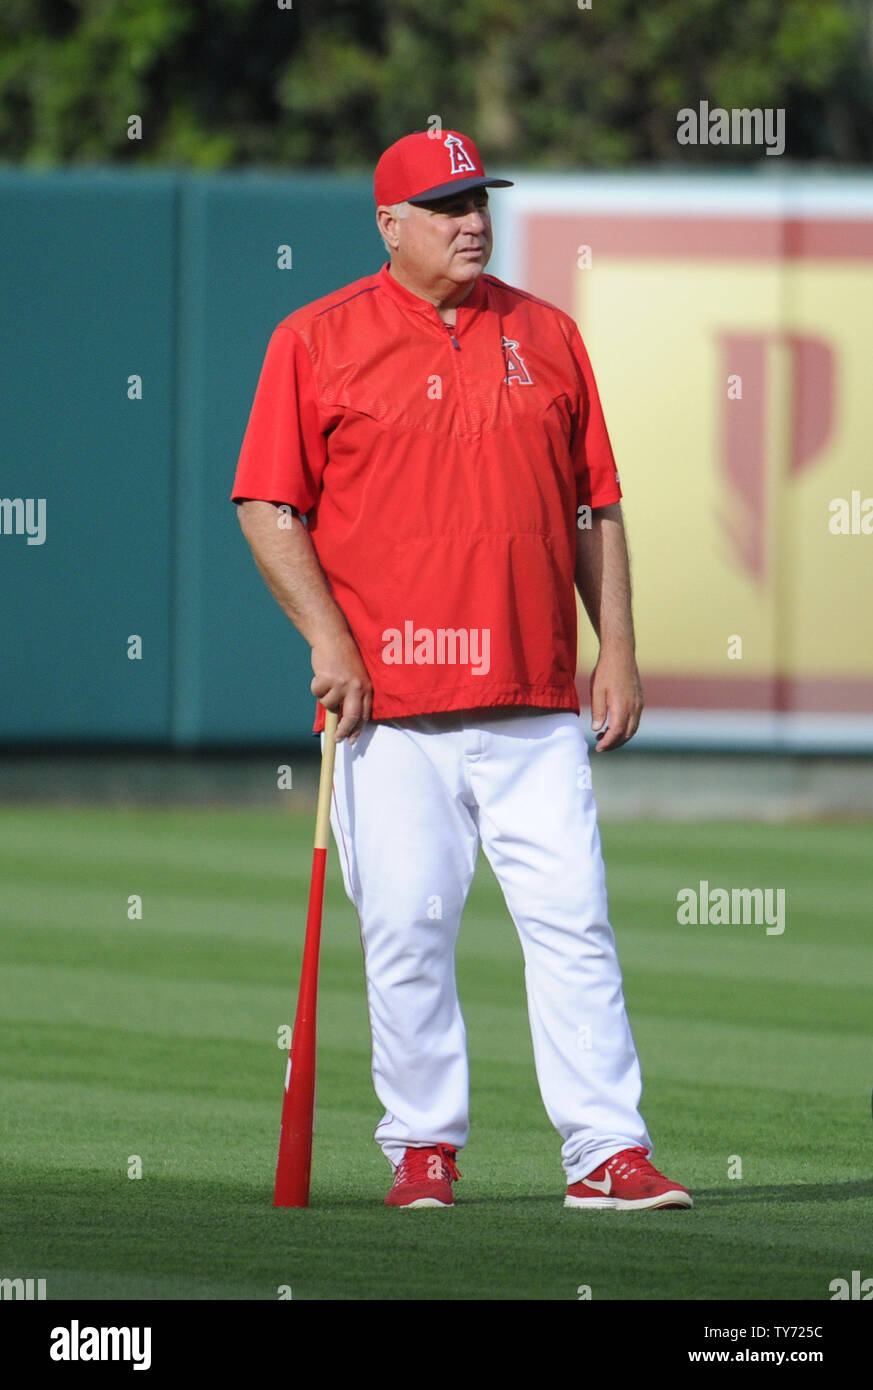 Angels manager Mike Scioscia could surpass Tommy Lasorda soon for milestone